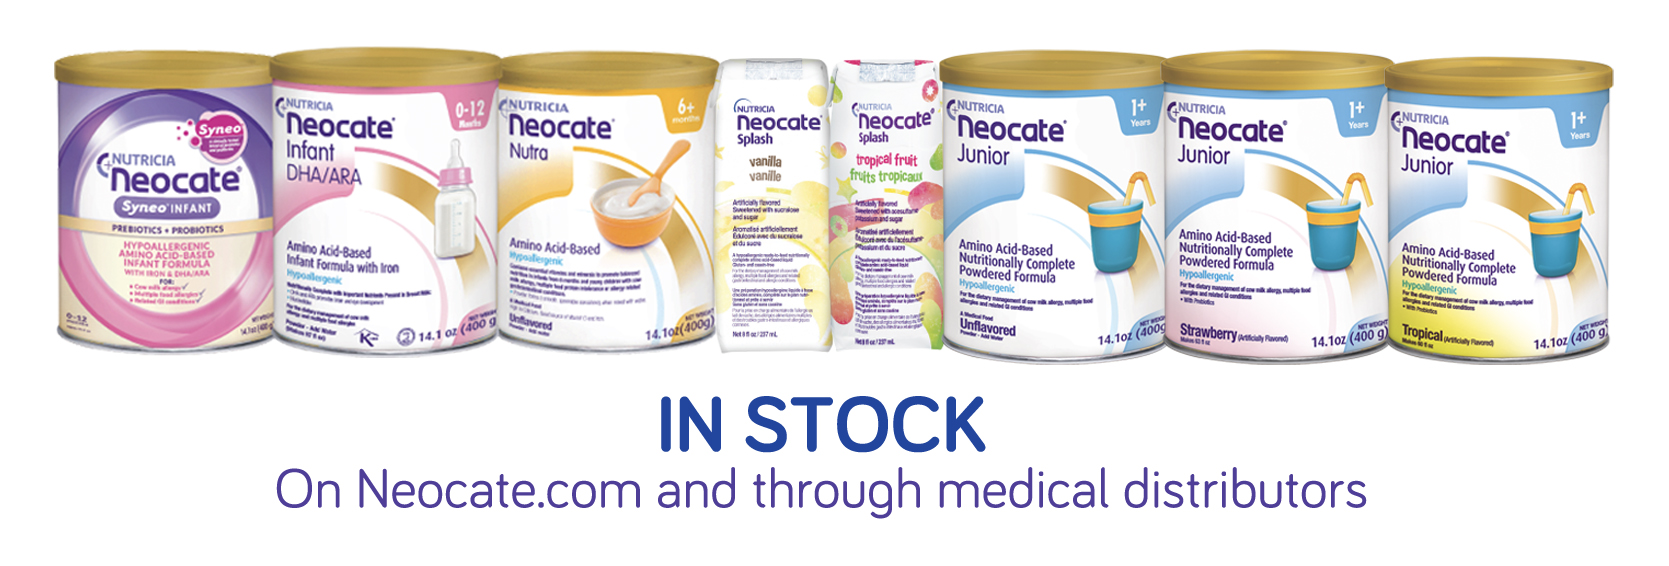 Neocate products in stock